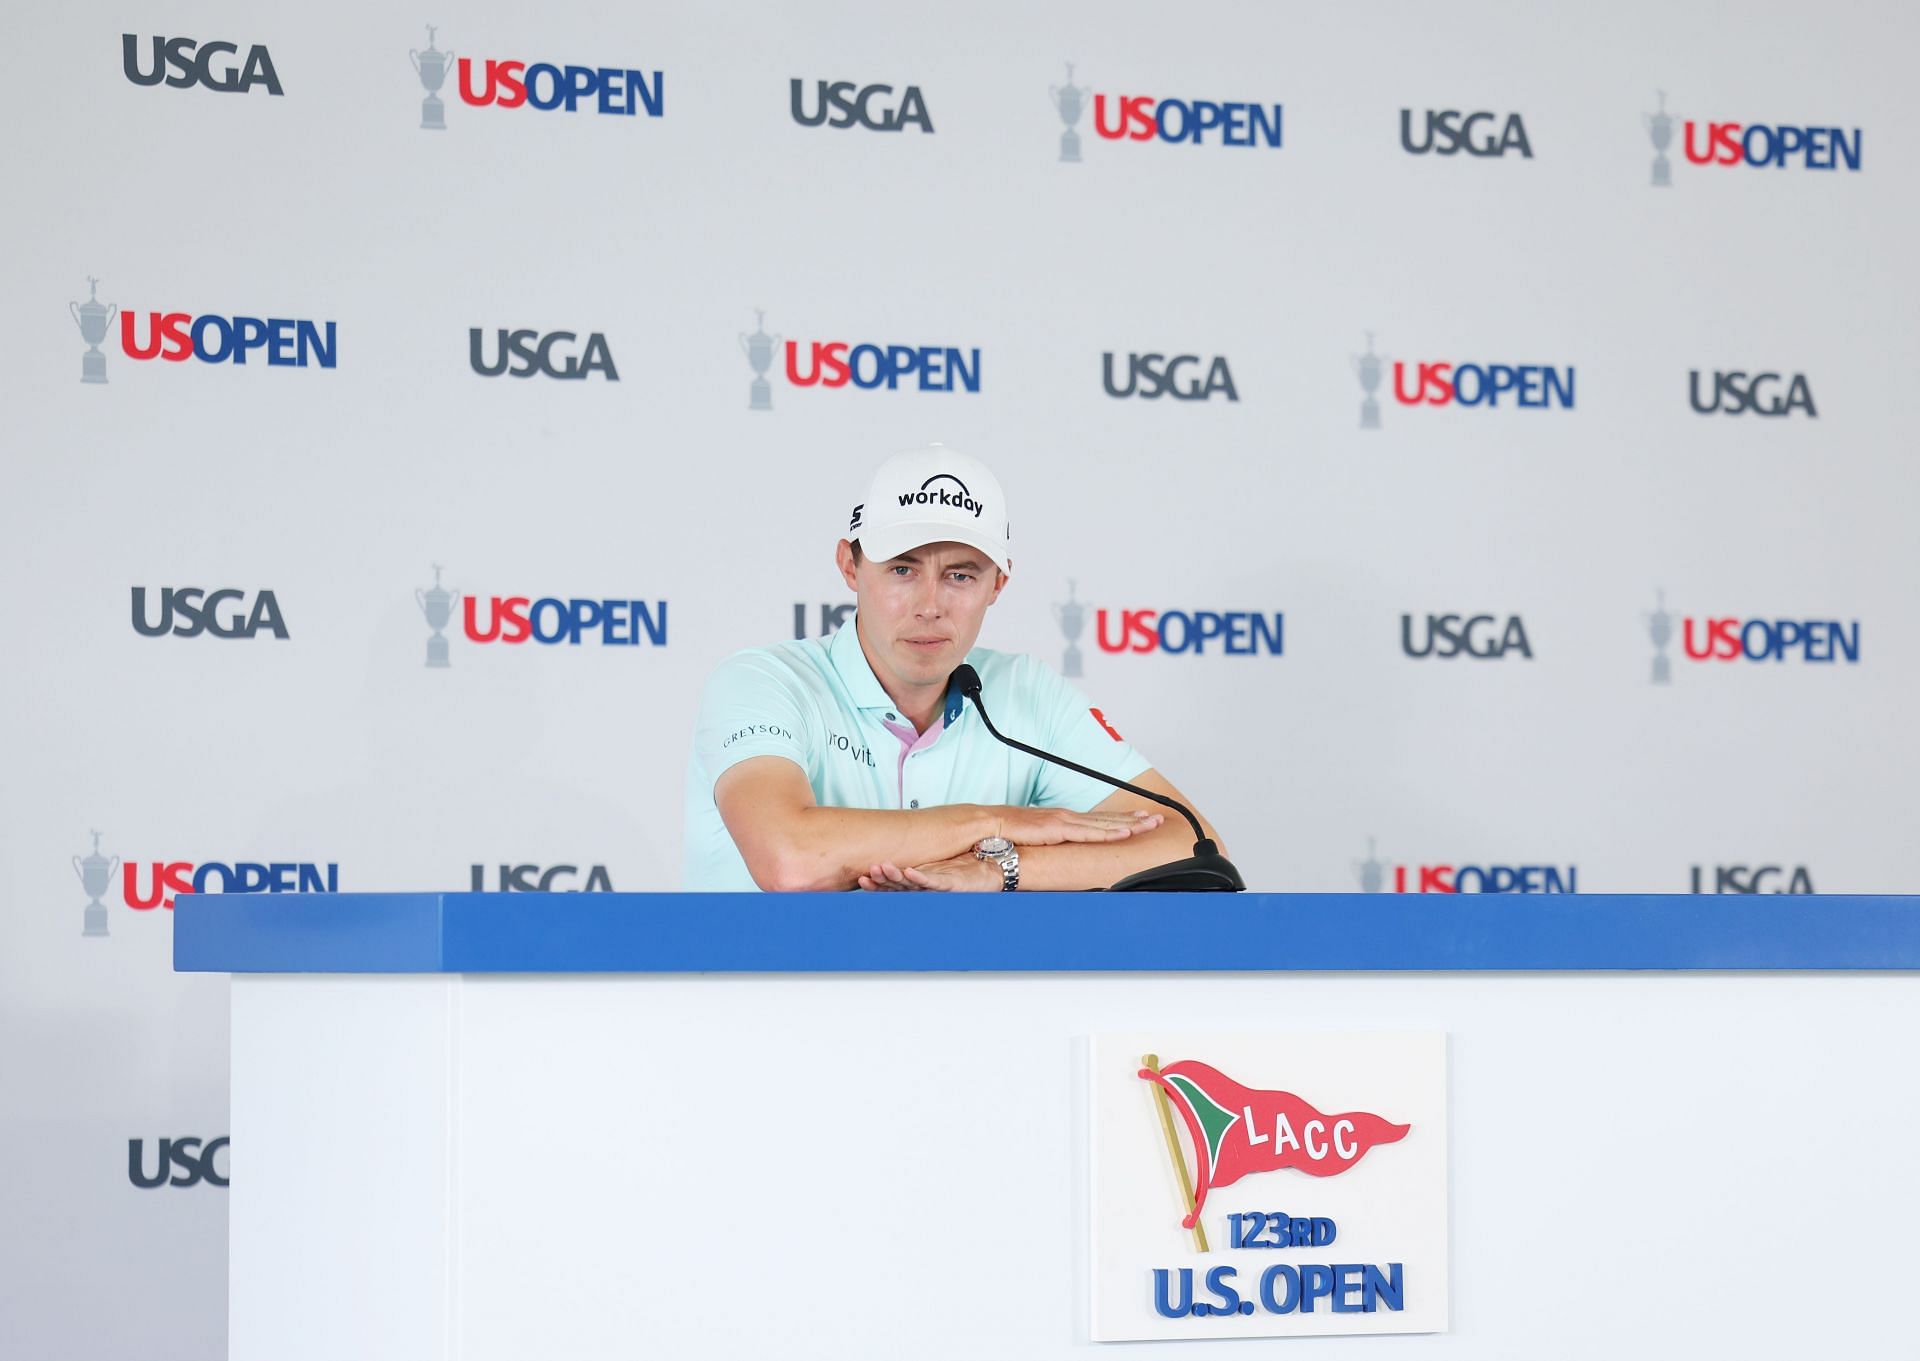 123rd U.S. Open Championship - Practice Day 1